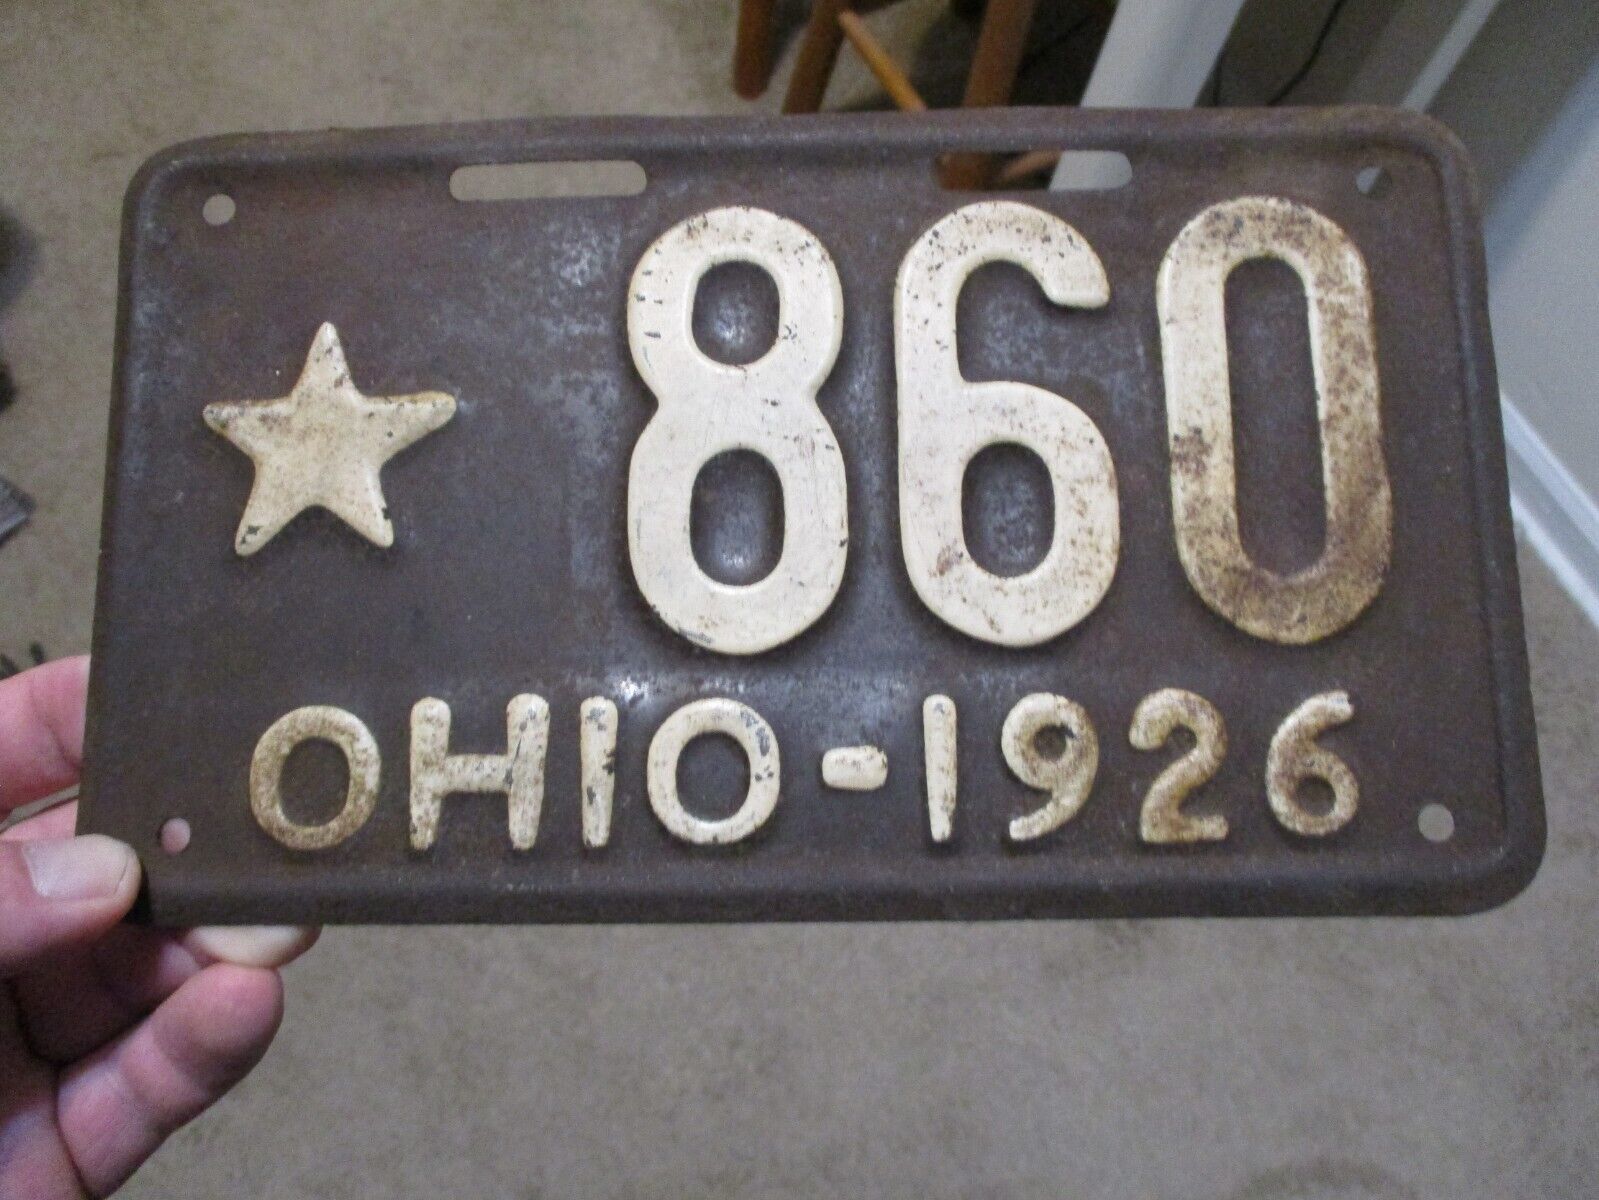 1926 OHIO STAR LOW # 860 LICENSE PLATE